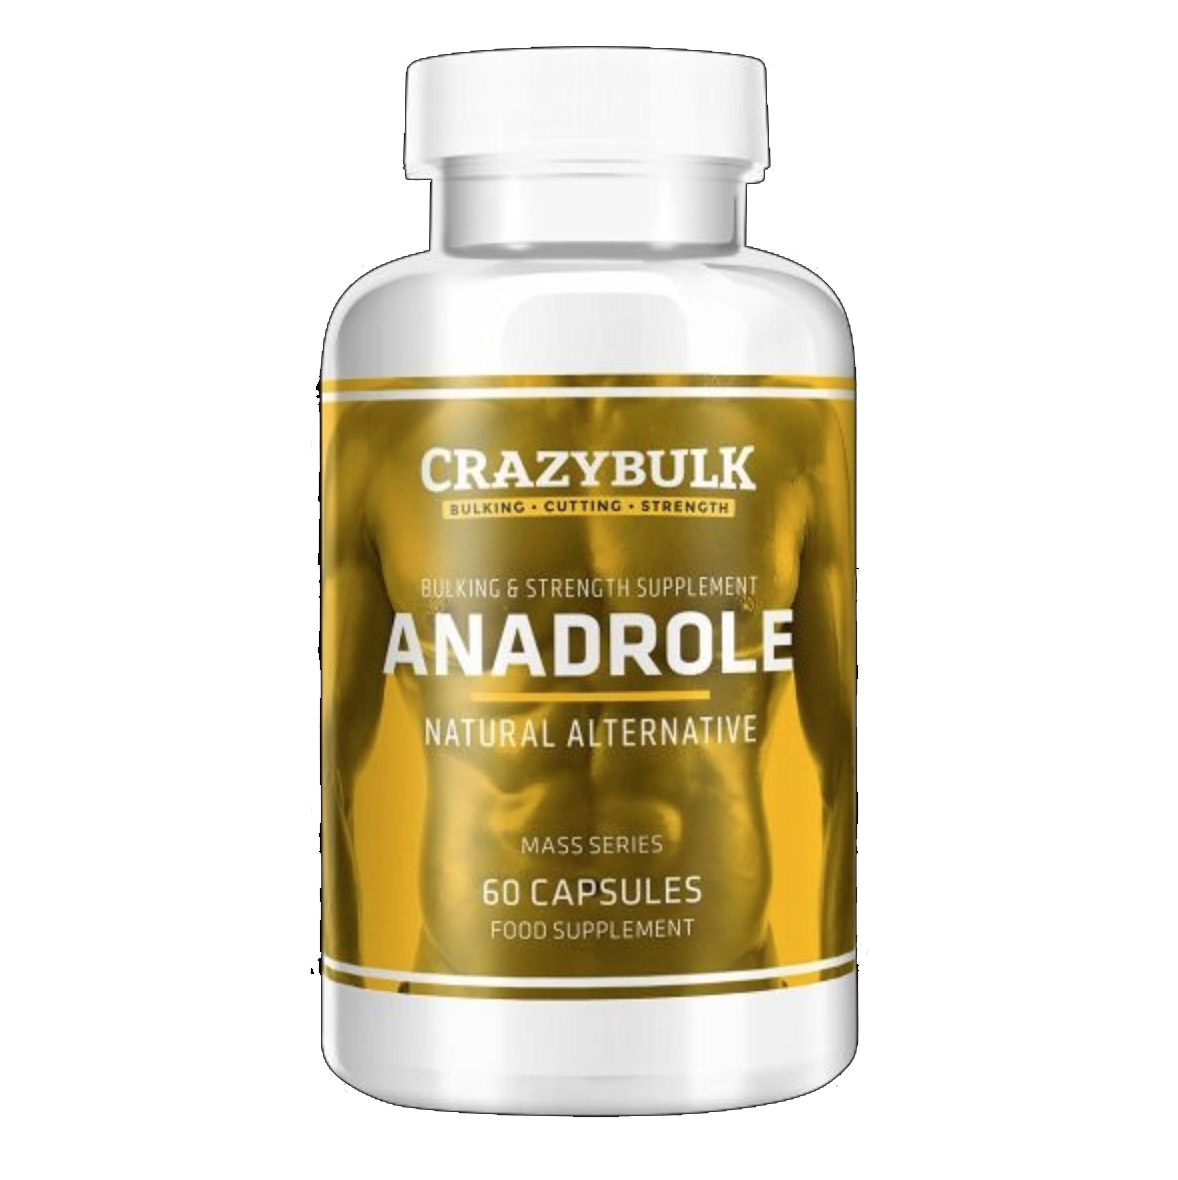 anadrol steroid - where to find anadrol for sale?